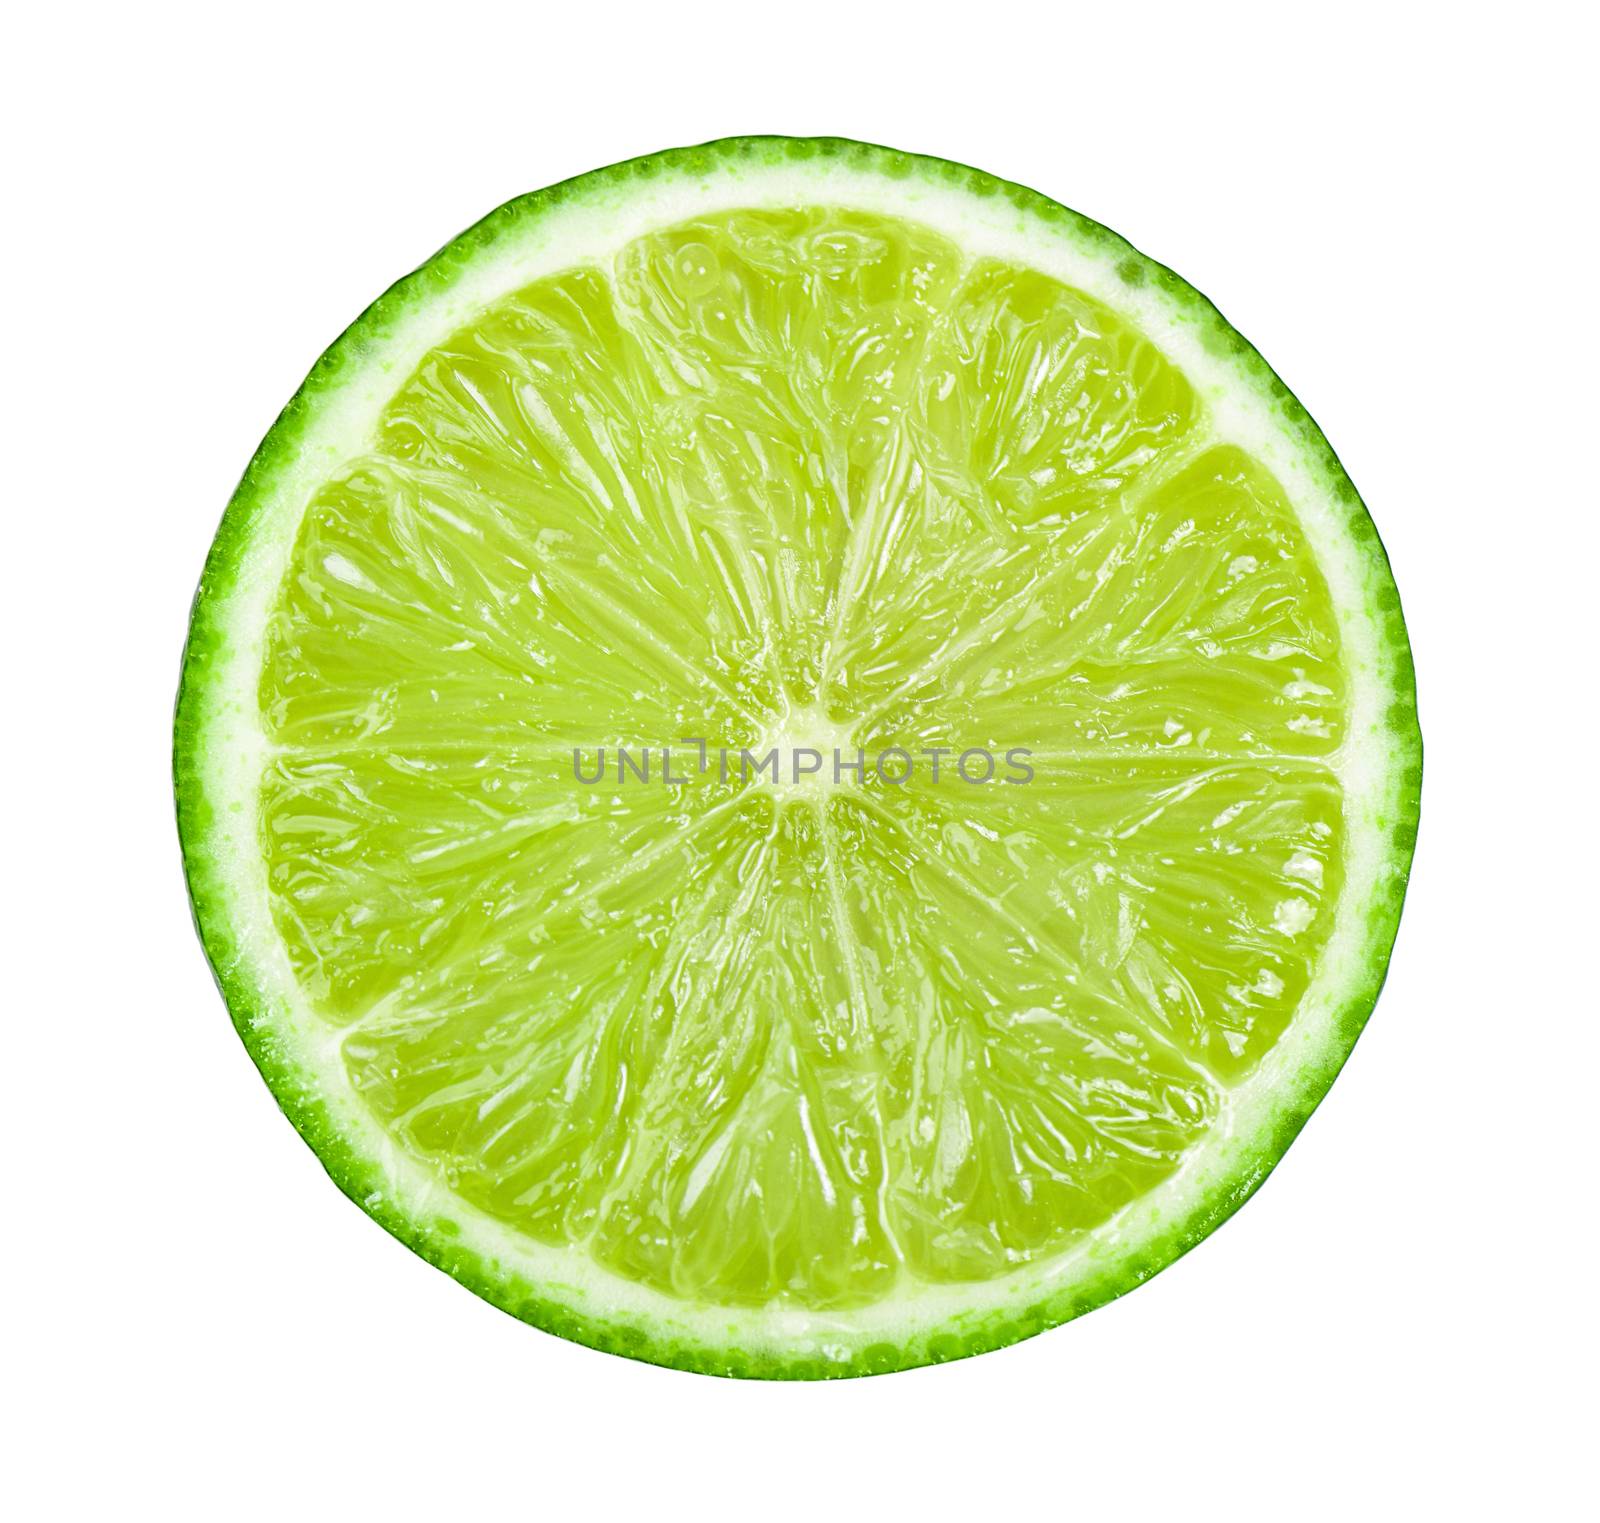 Juicy slice of lime isolated on white background by sommai